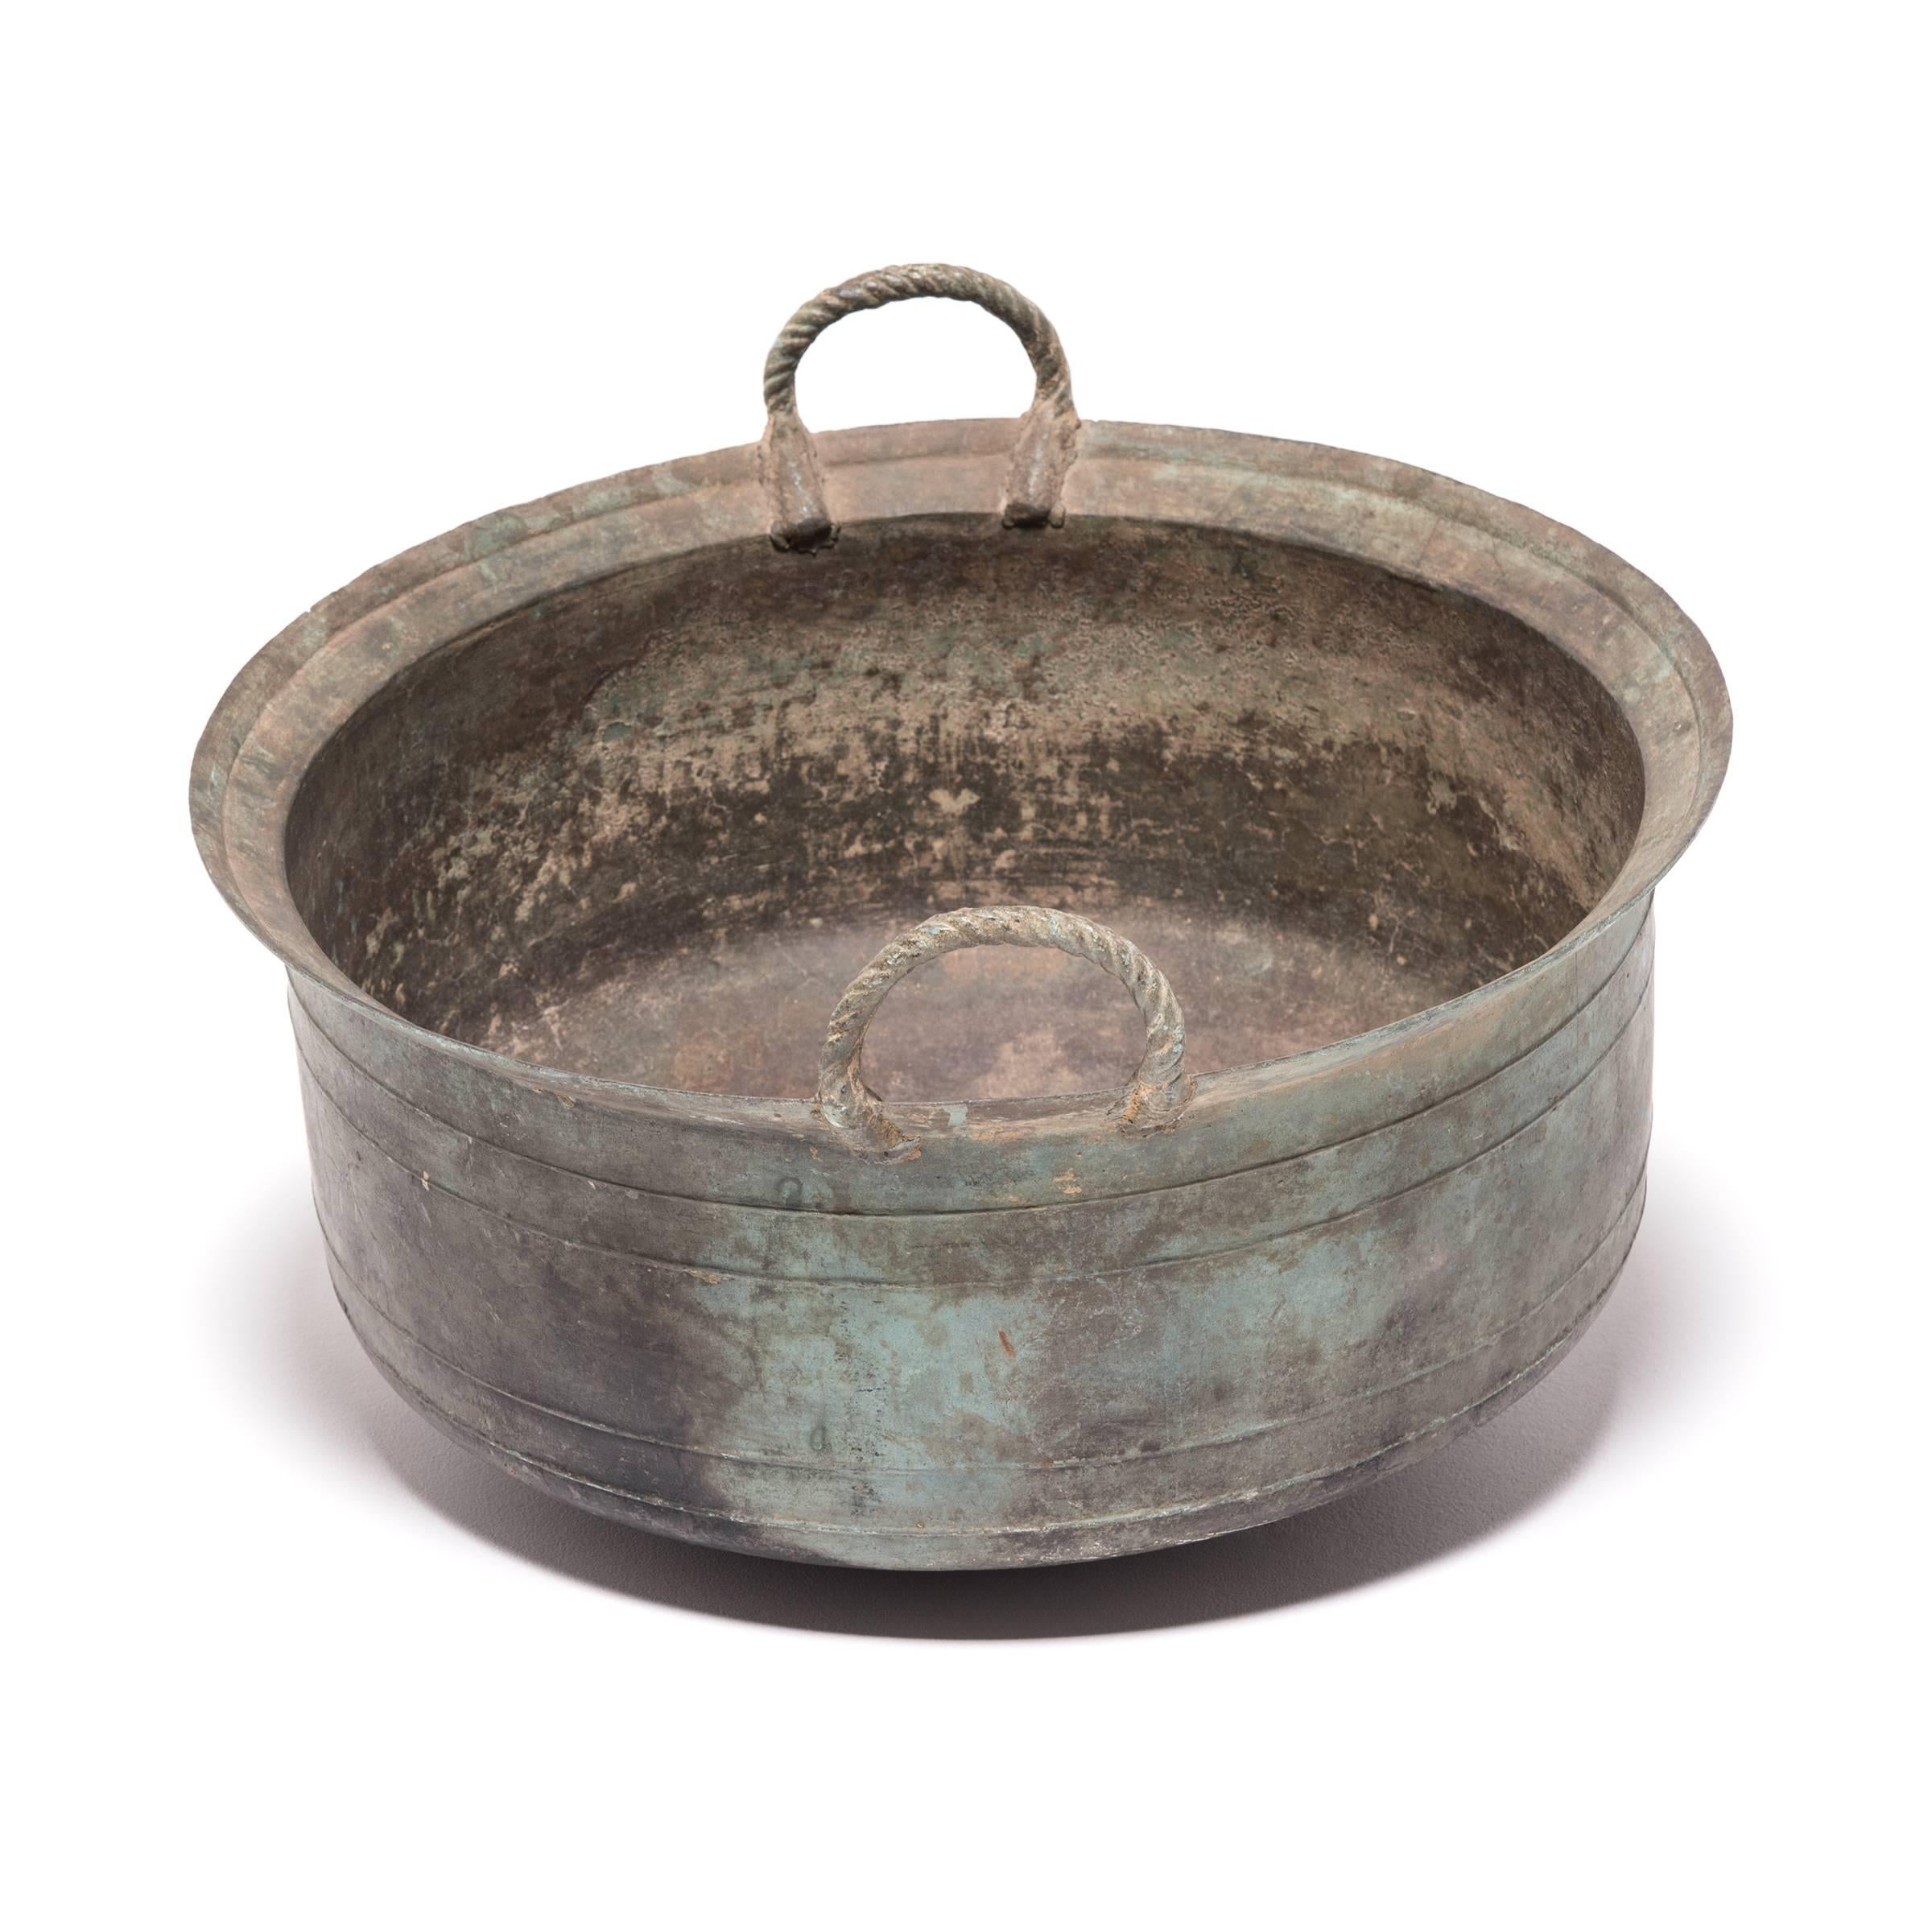 18th Century and Earlier Thai Ban Chiang Bronze Kettle, c. 2100 BC